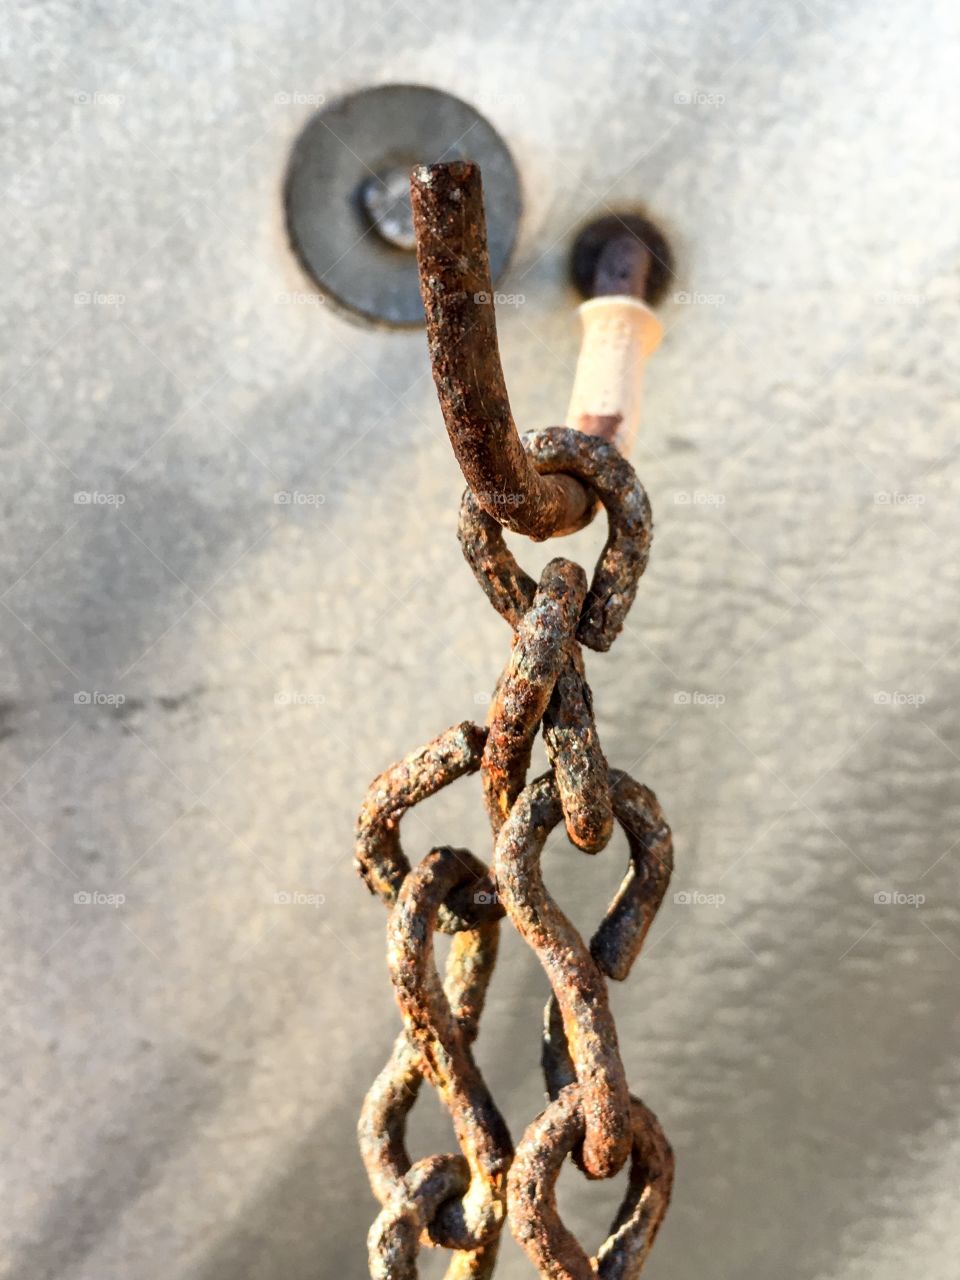 Antique old rusted chain hanging from hook
Closeup image